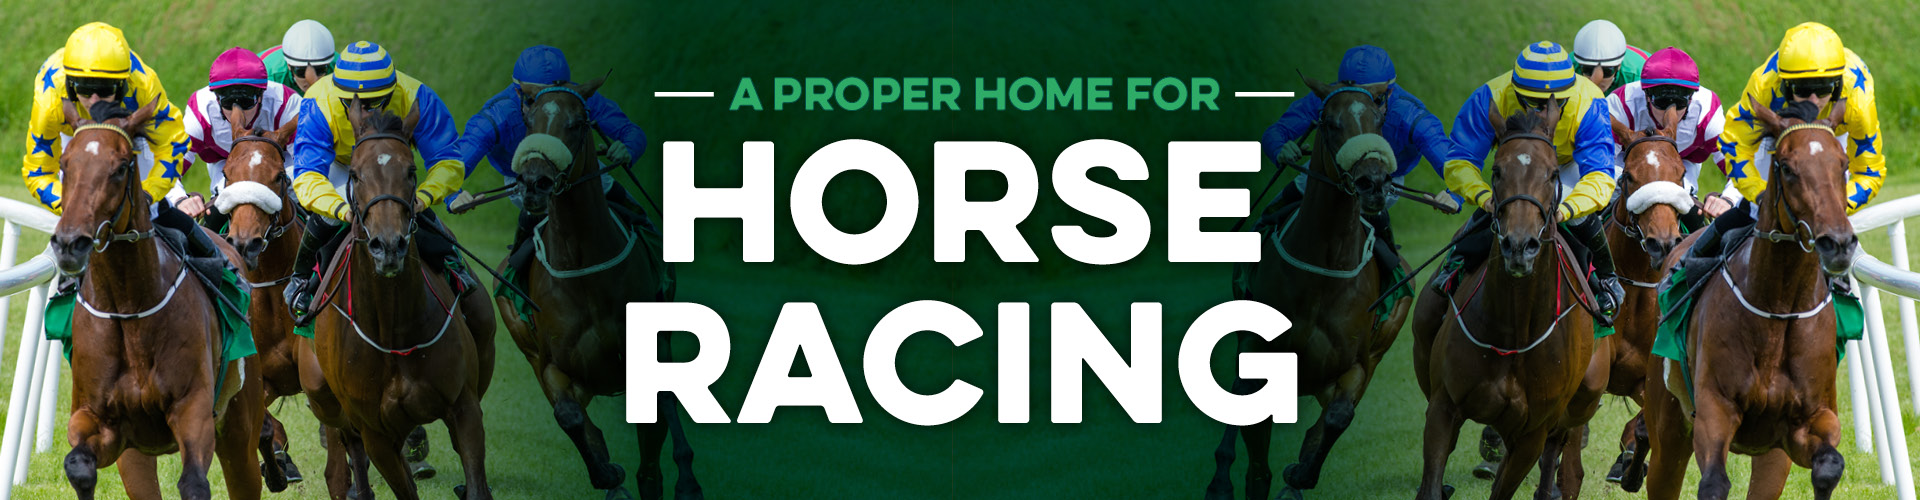 Watch horse racing live at The Dolphin pub